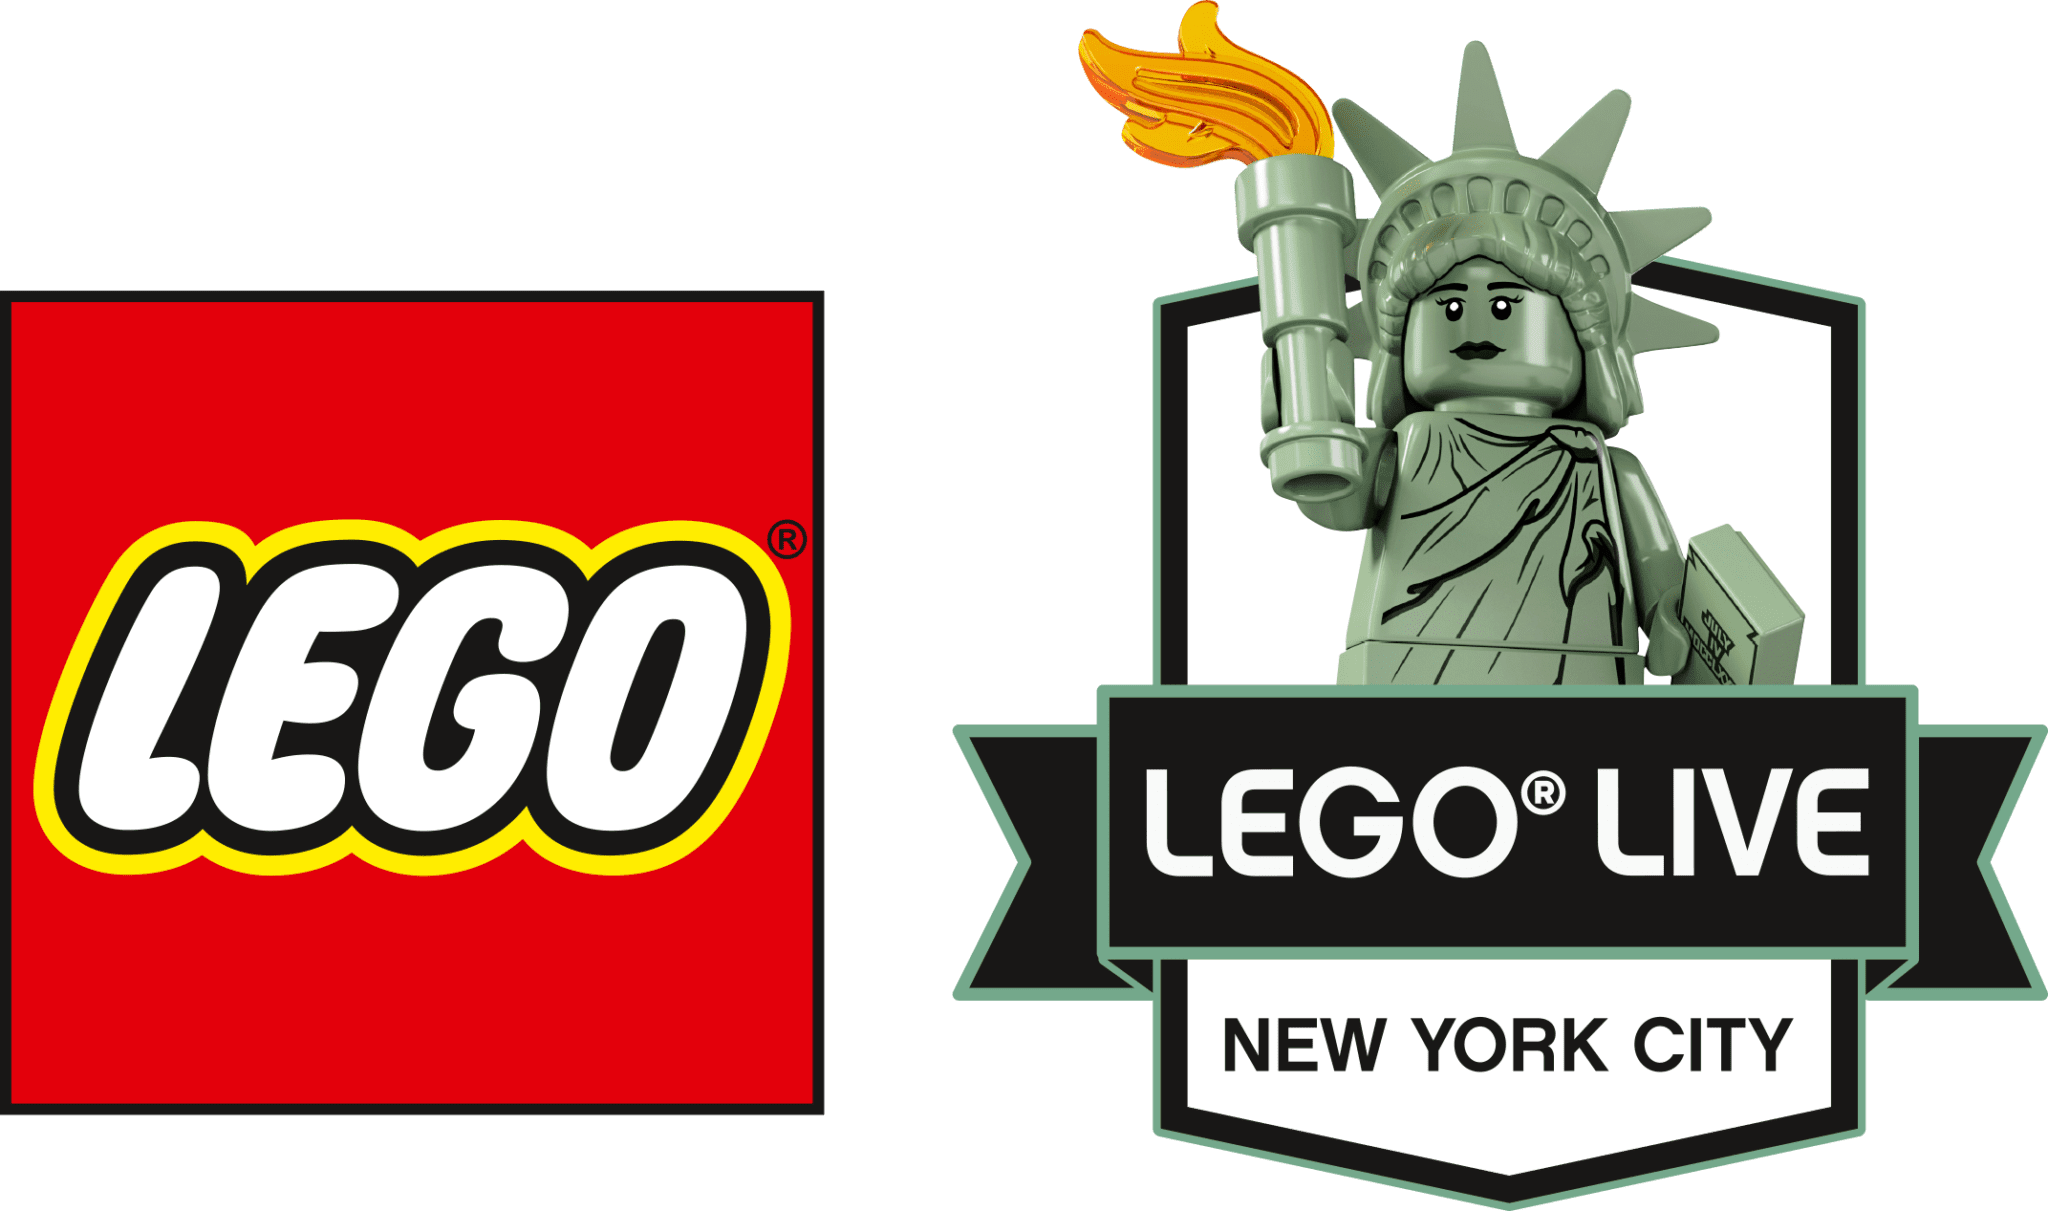 Win LEGO LIVE tickets here!